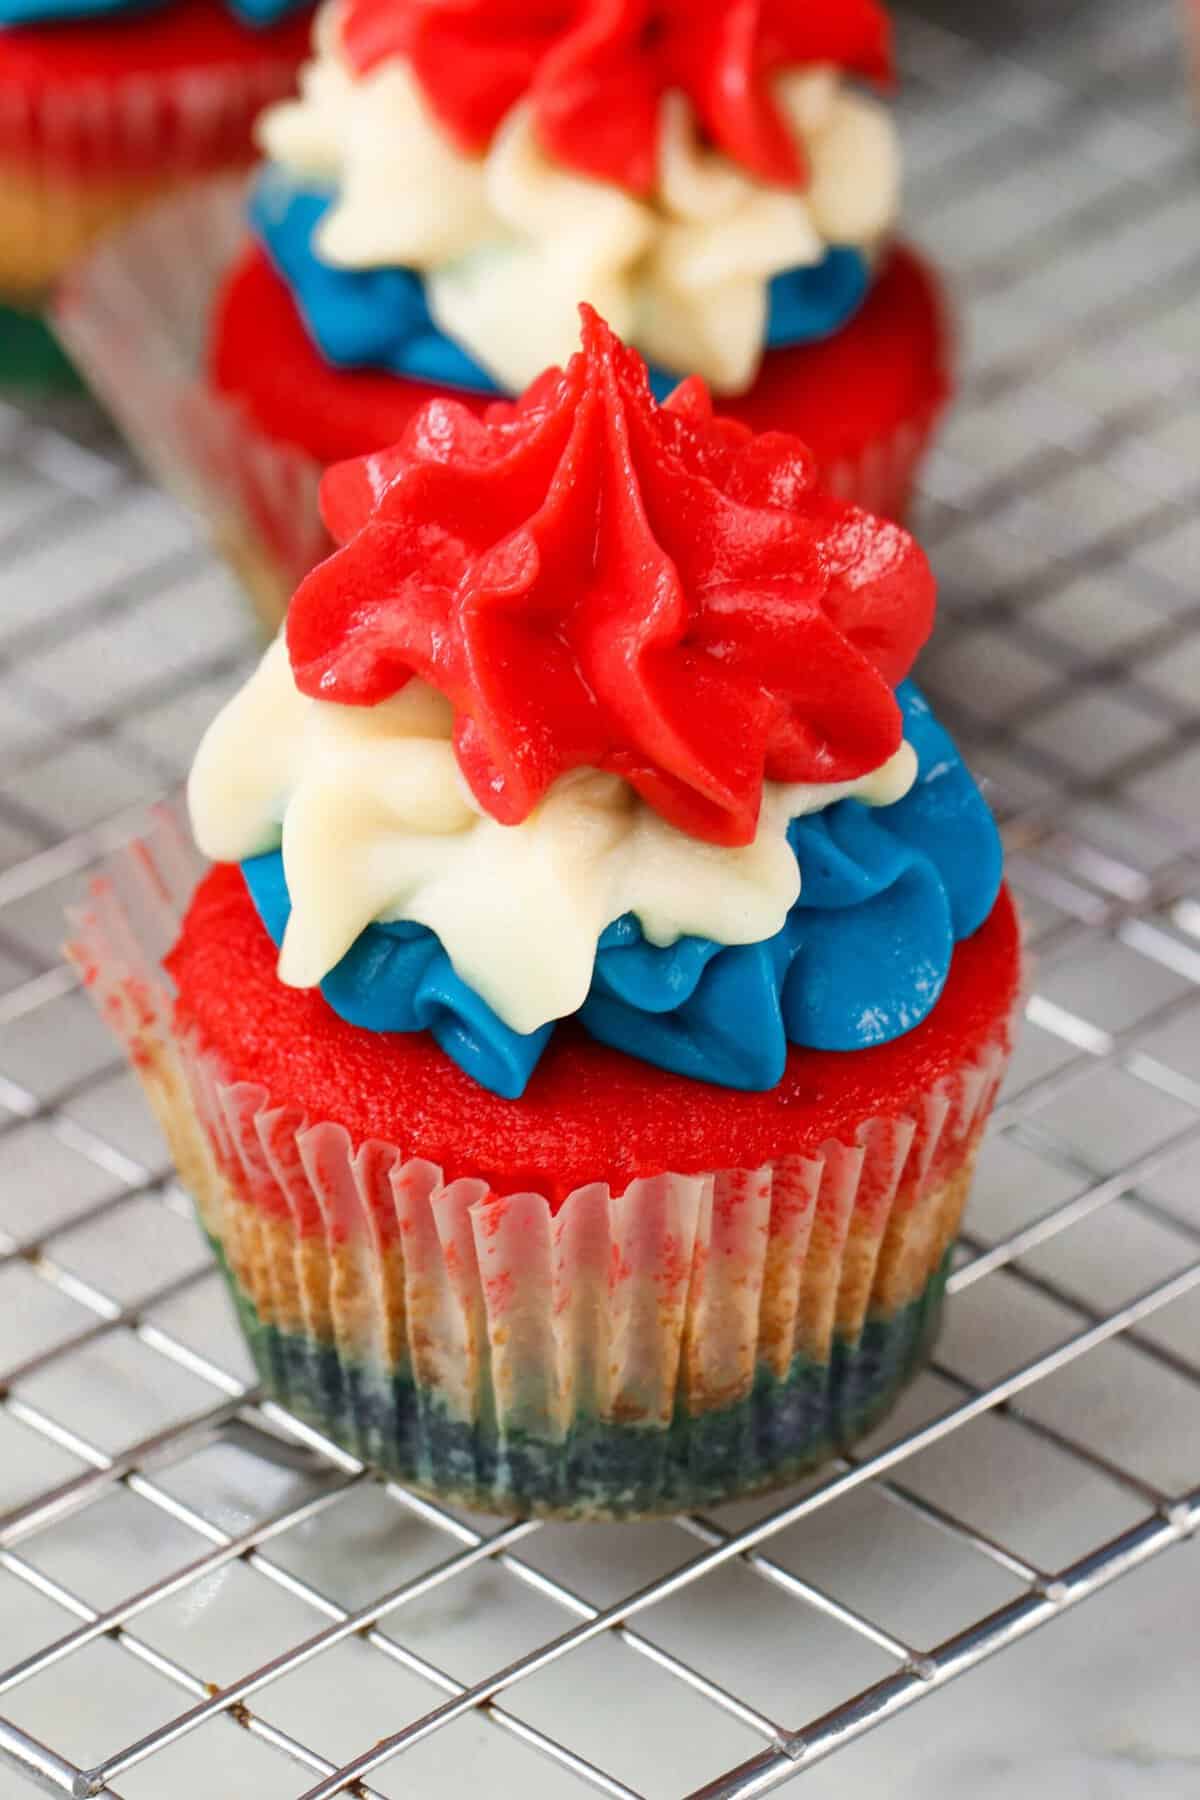 4th of July cupcakes deliver a festive treat for your holiday cookout